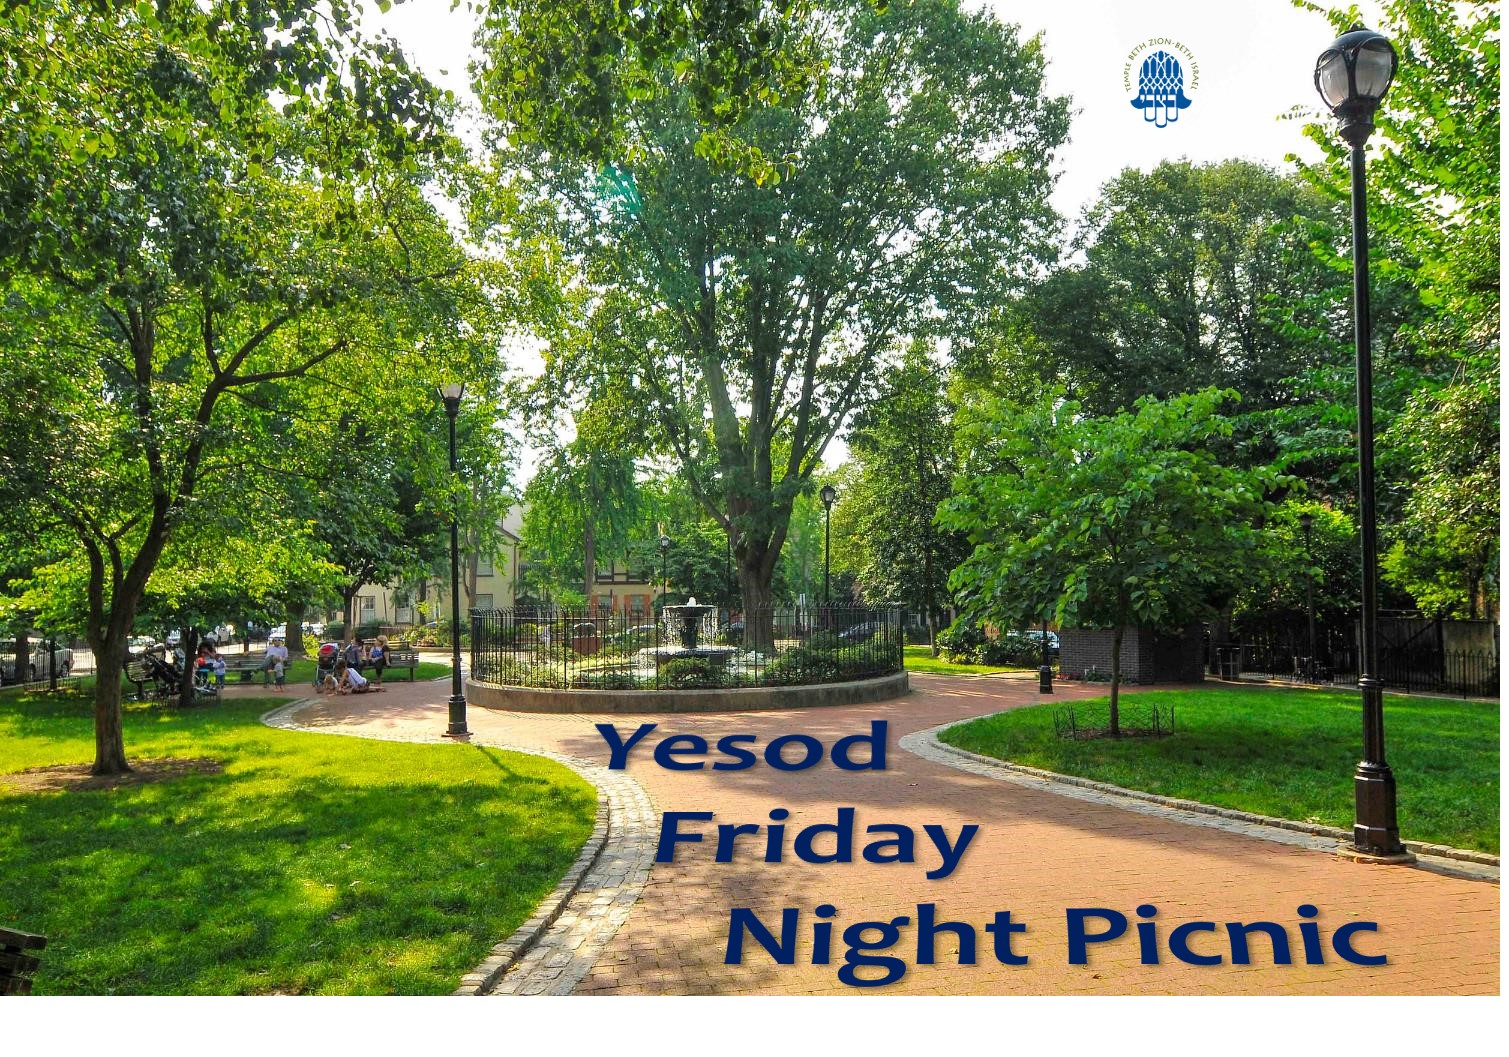 Yesod Friday Night Picnic in the Park